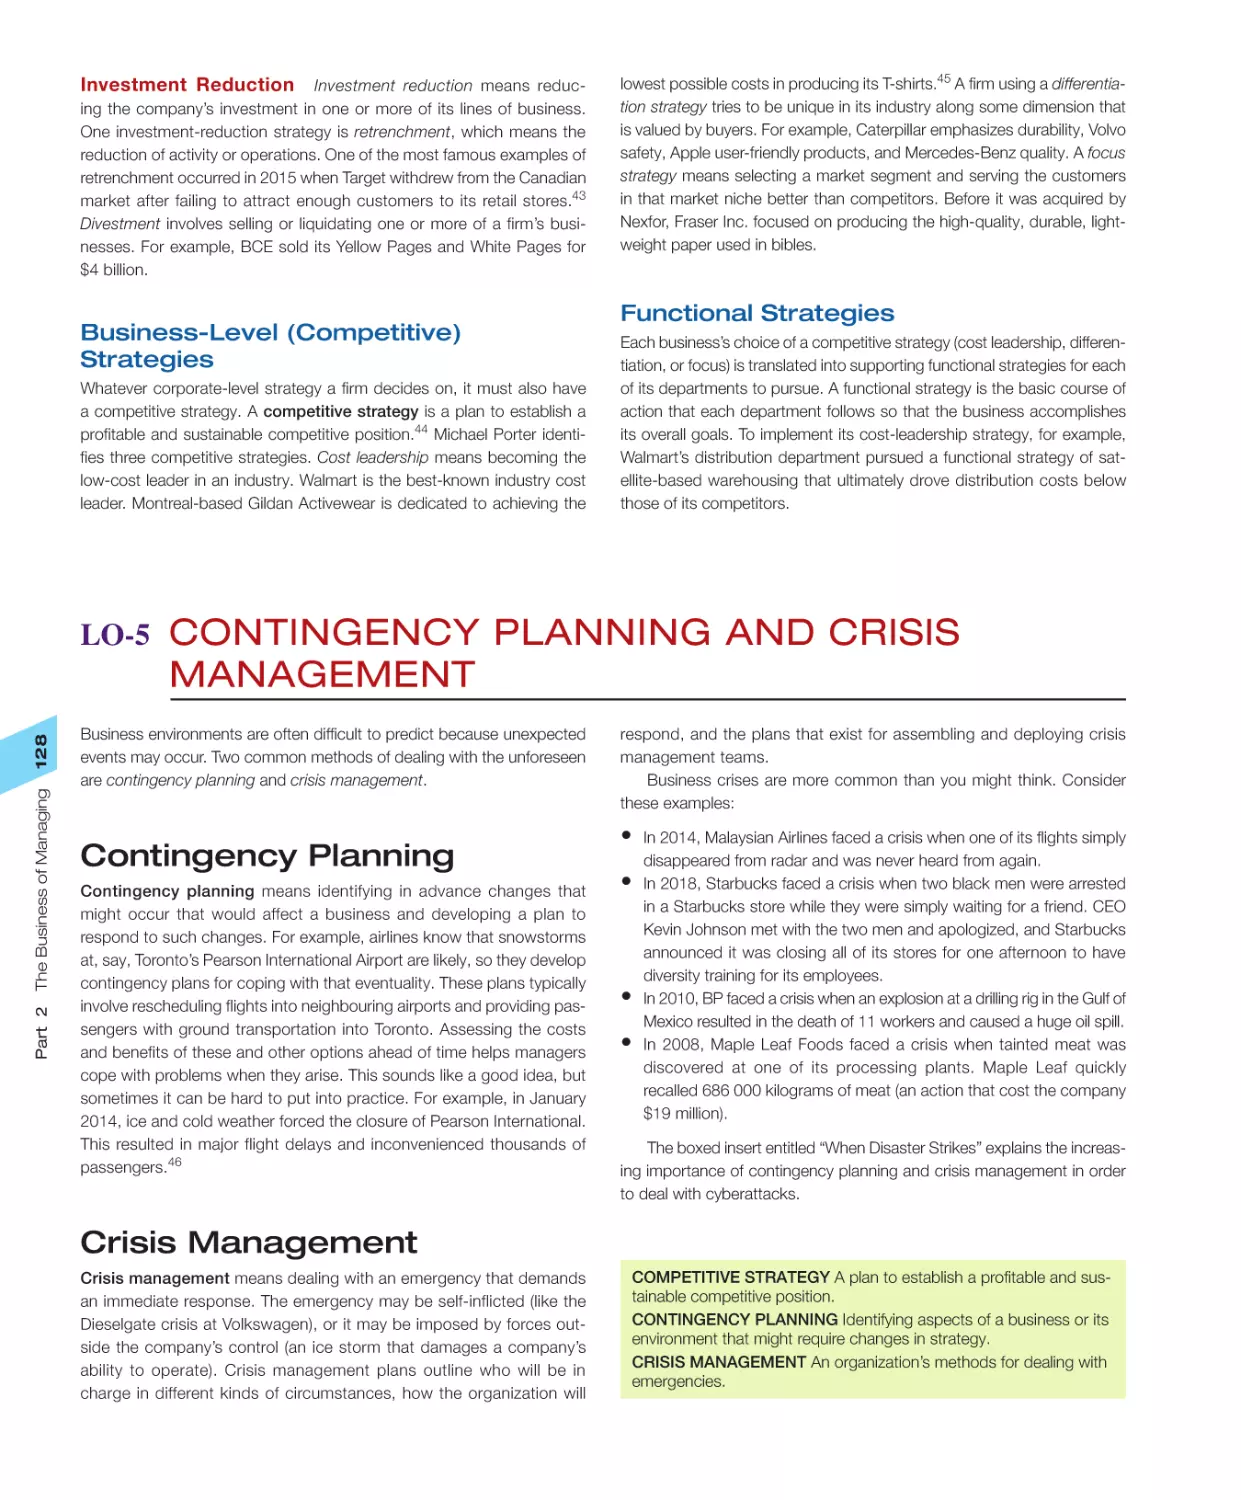 LO‐5 Contingency Planning and Crisis Management
Crisis Management